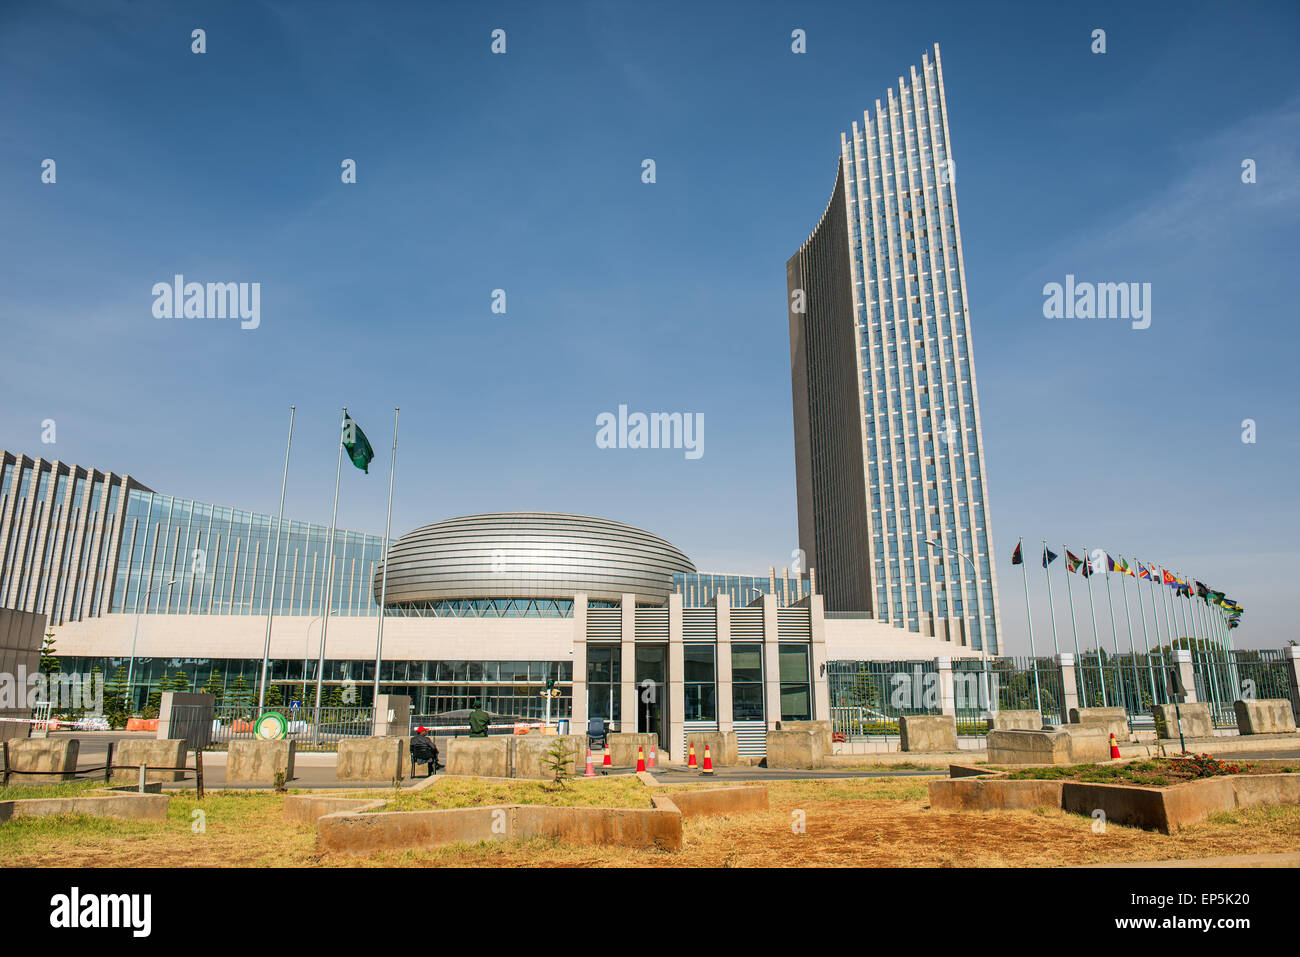 The African Union's headquarters building in Stock Photo